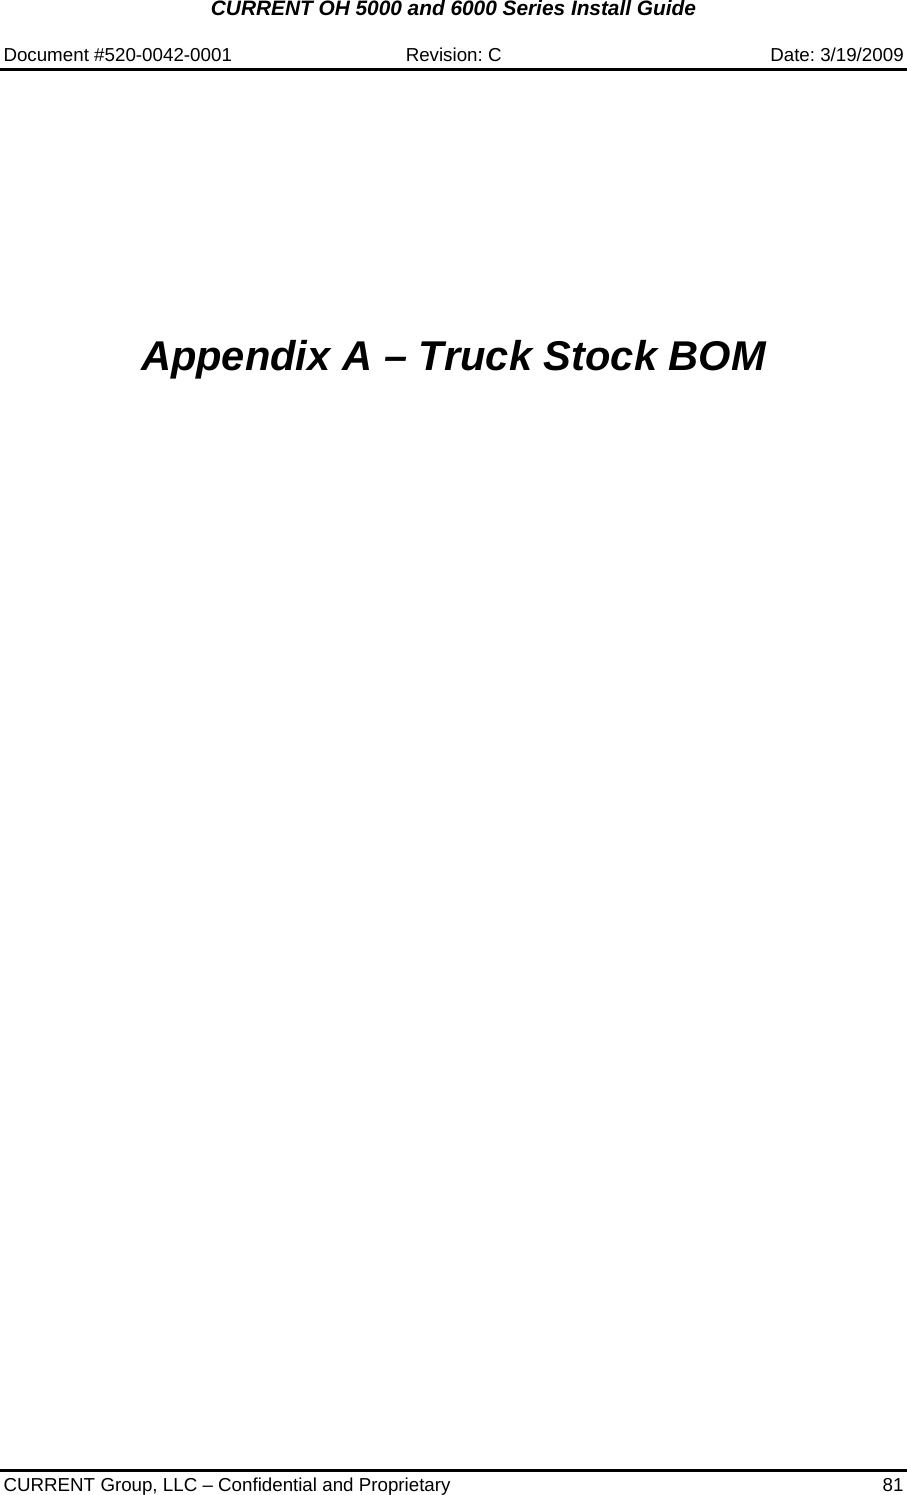 CURRENT OH 5000 and 6000 Series Install Guide  Document #520-0042-0001  Revision: C  Date: 3/19/2009  CURRENT Group, LLC – Confidential and Proprietary  81          Appendix A – Truck Stock BOM  